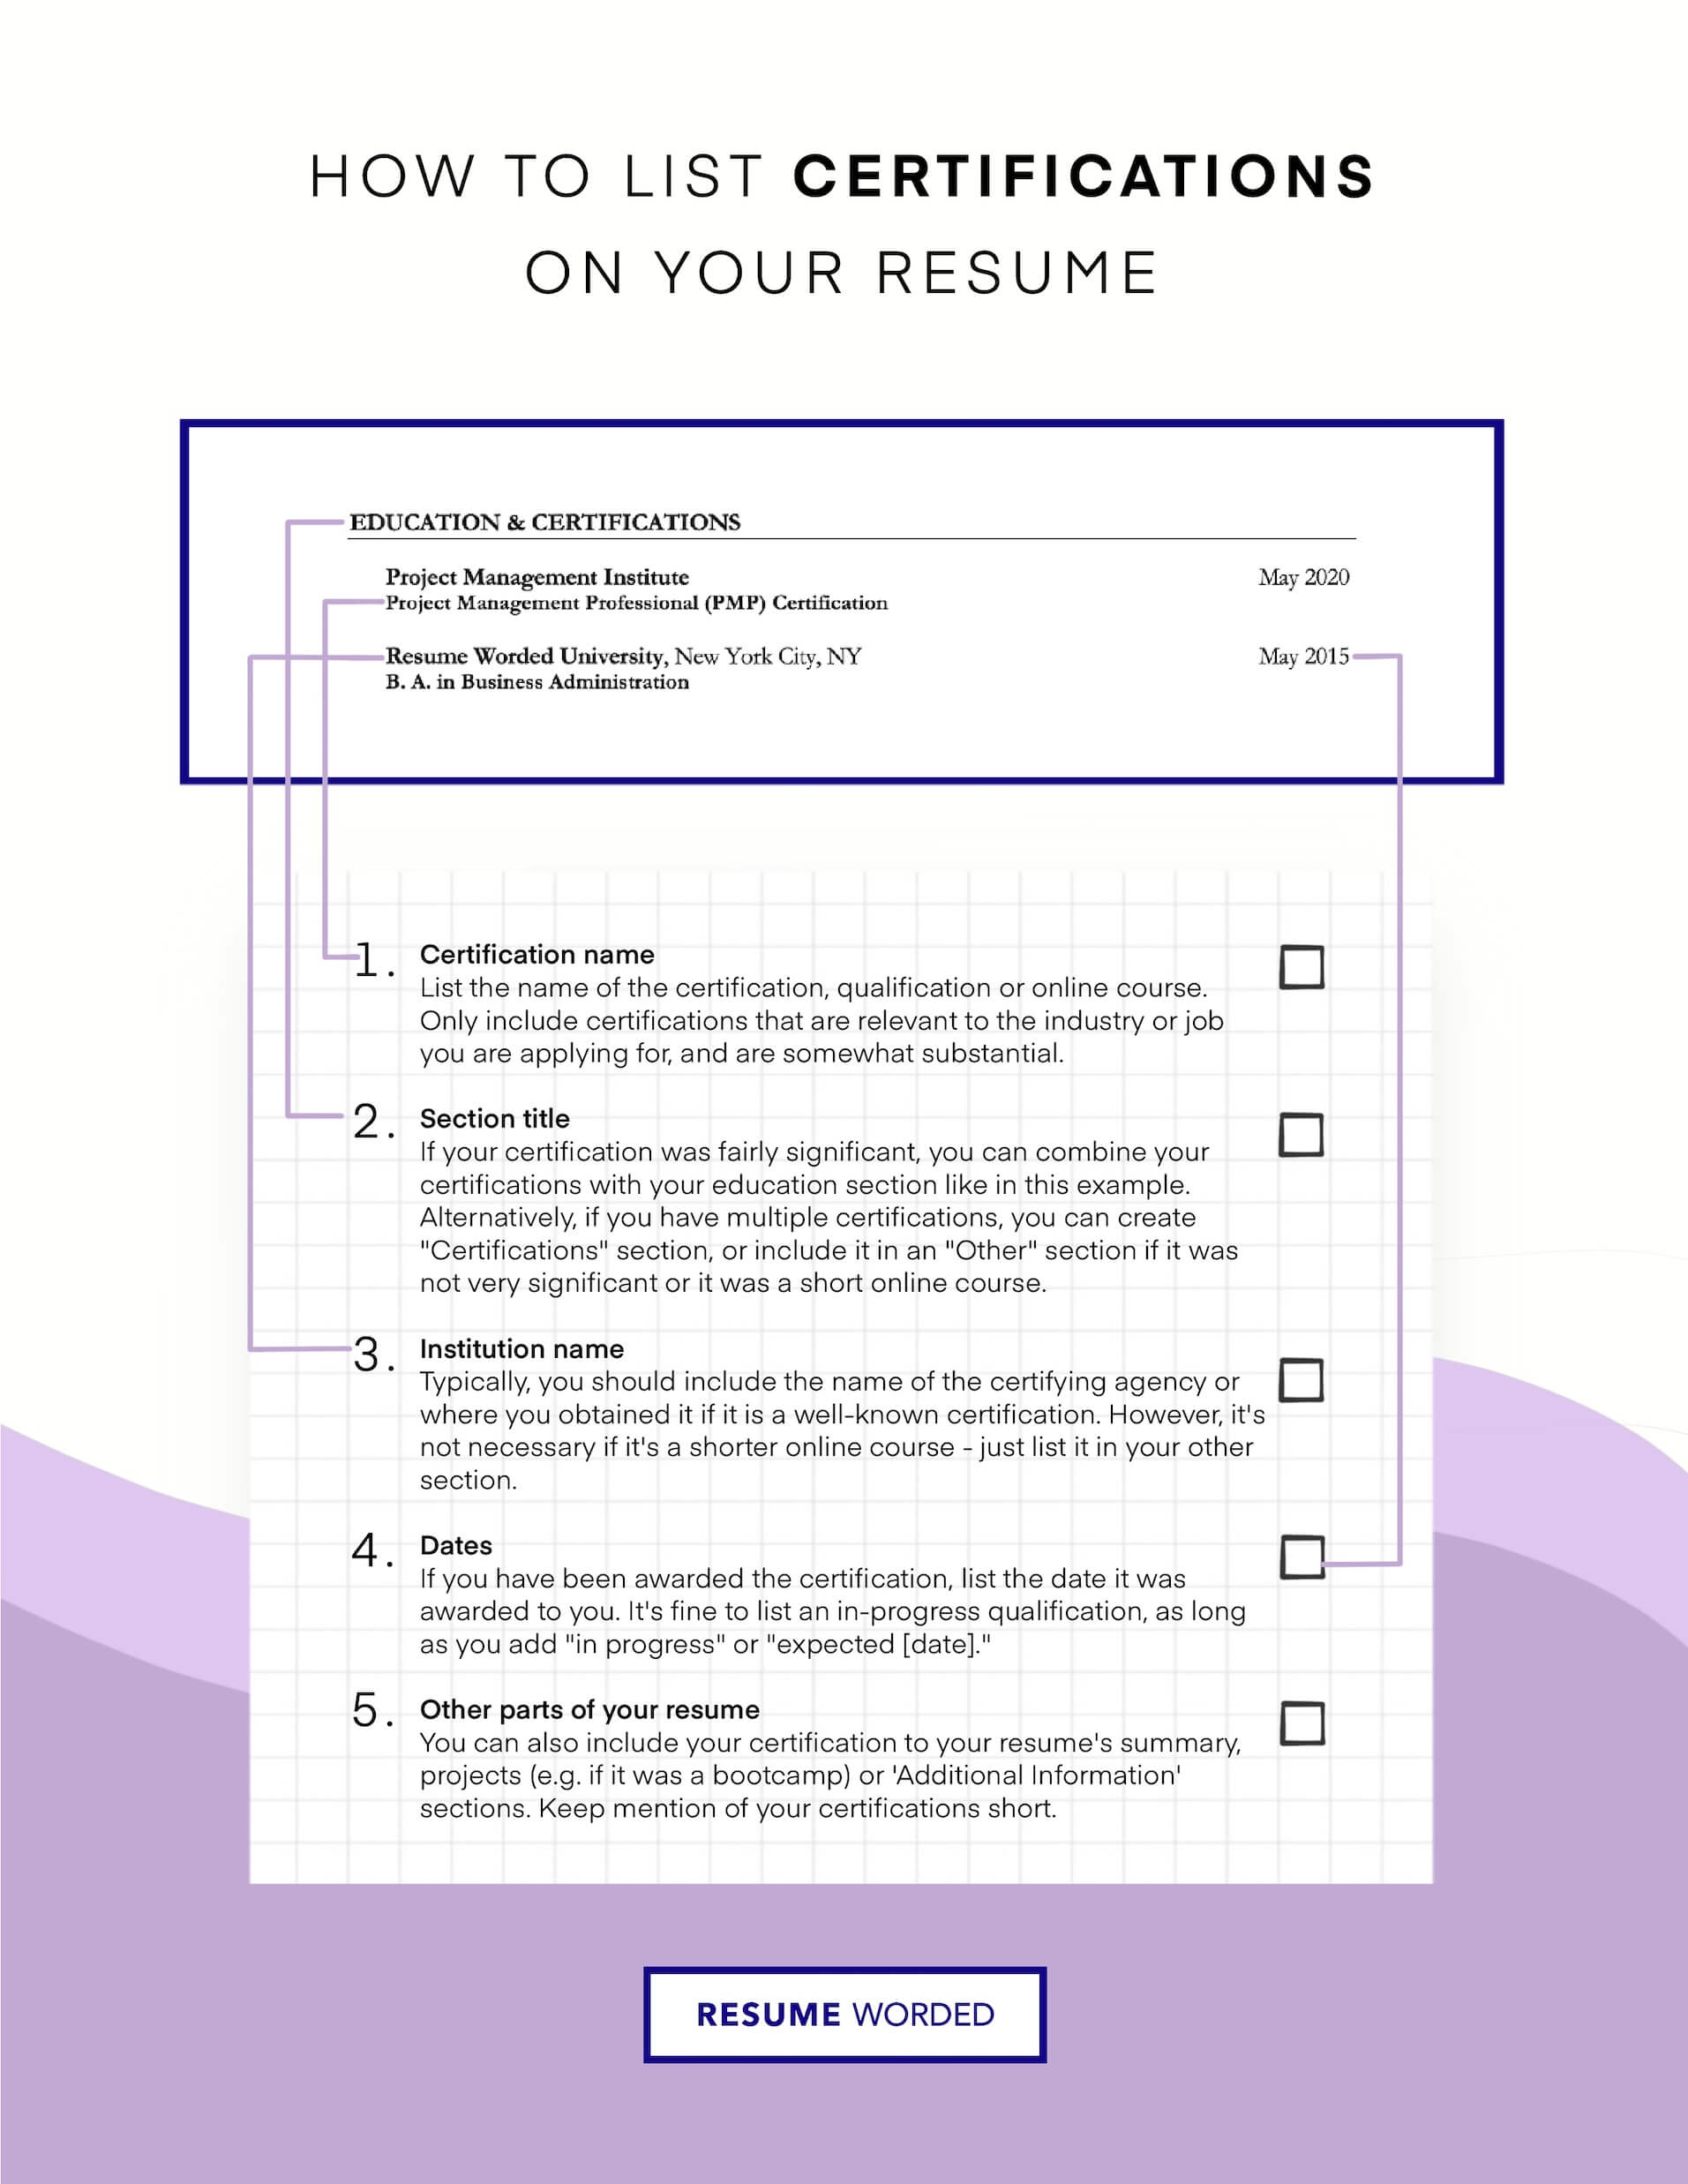 Get certified as a tax professional. - Senior Tax Accountant Resume